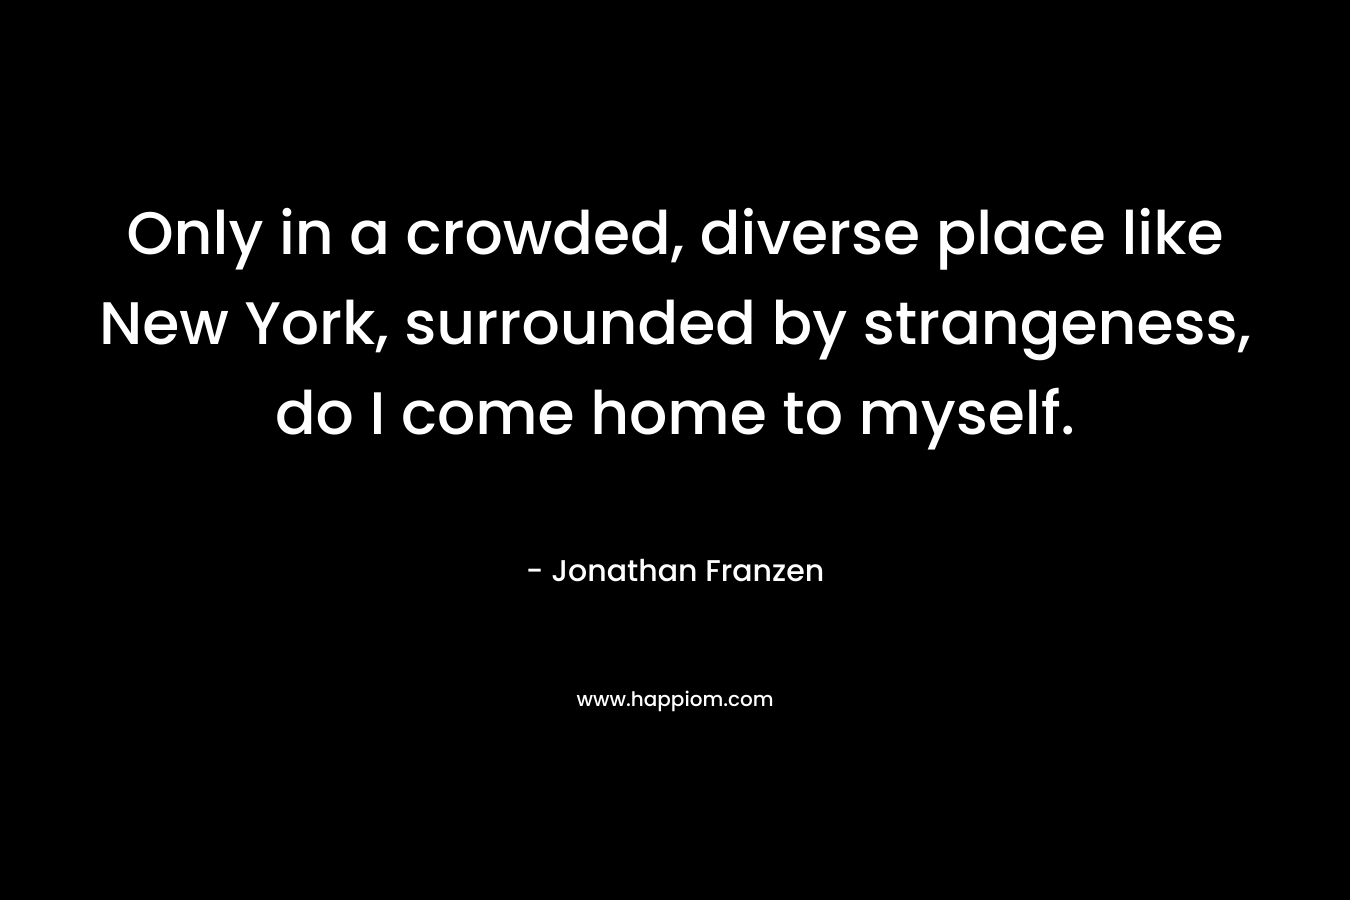 Only in a crowded, diverse place like New York, surrounded by strangeness, do I come home to myself. – Jonathan Franzen